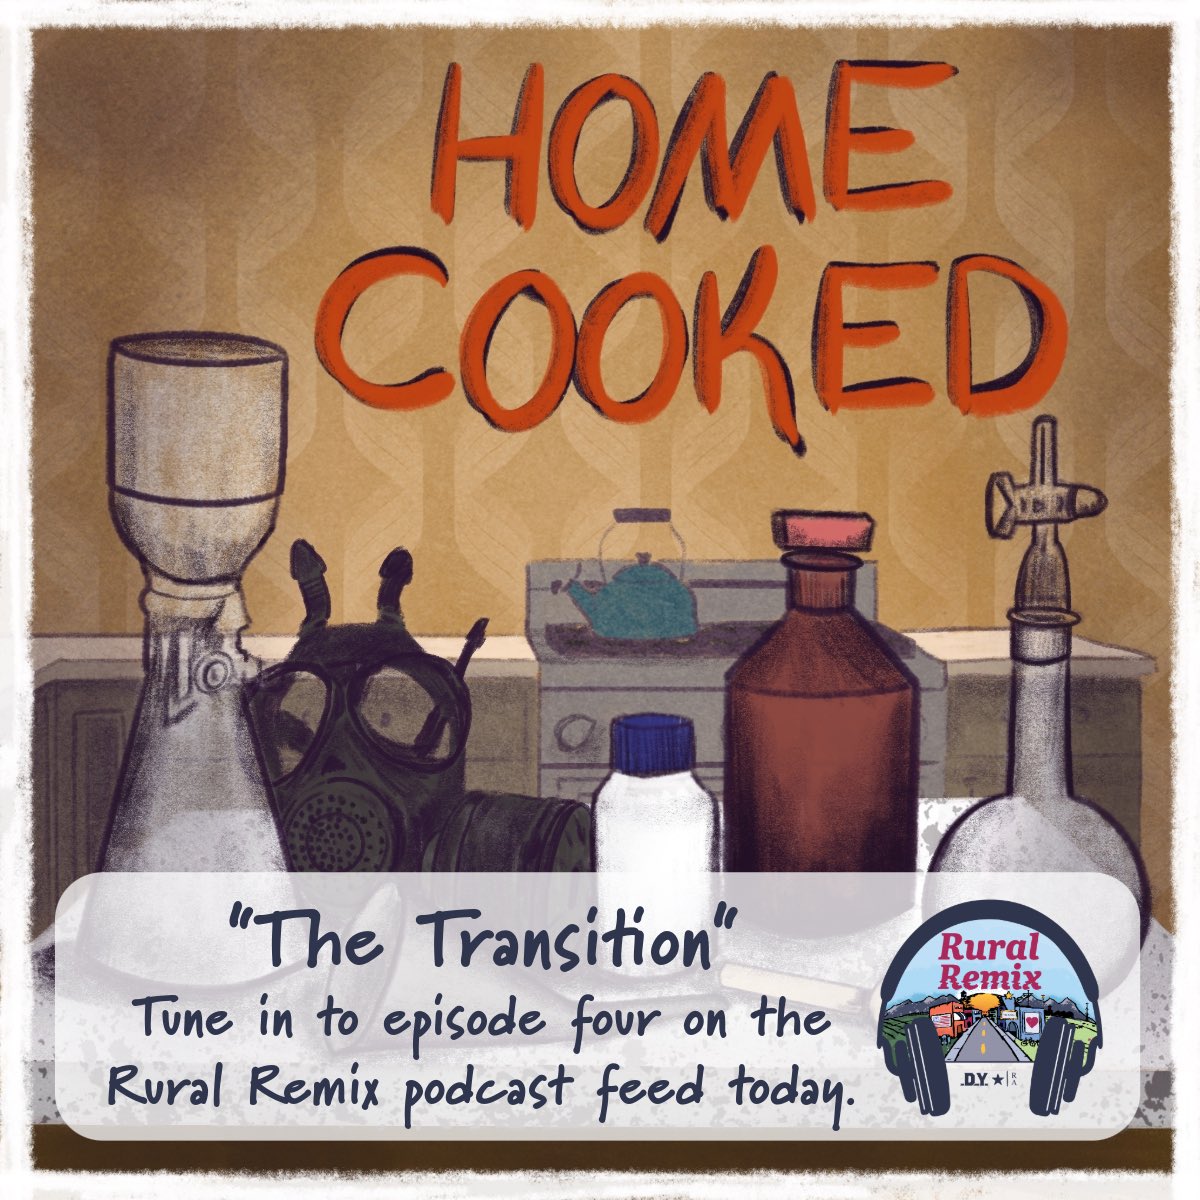 EPISODE 4 OUT NOW | How did Meth in America transition from domestic production to foreign drug trafficking? 🎧 Tune in to the latest episode of Home Cooked, “The Transition,” to learn more: podcasters.spotify.com/pod/rural-remi…